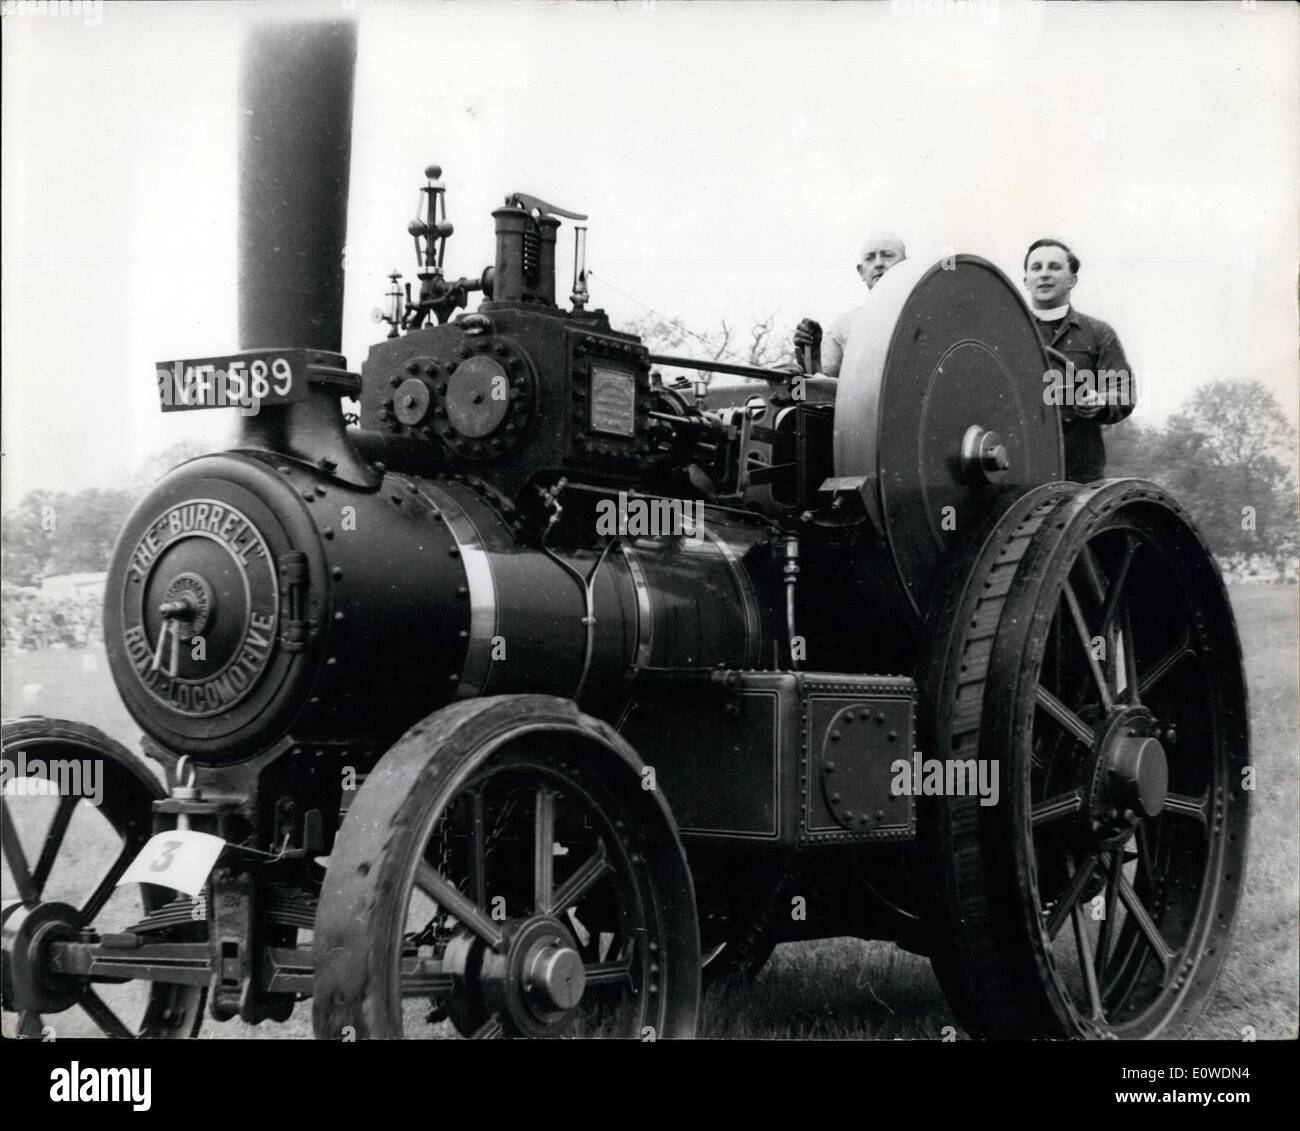 Jun. 06, 1962 - Racing Rectors Wins...at 4MPH: The Winner, Rev. Norman Lempriere, 33, rector of little Munden & Sacombe, Ware, Herts., driving a traction engine yesterday in a race against five other clergymen, all driving steam traction engines. The rally at Great Wymondley, Herts., drew 25,000 enthusiasts, and some of the engines (speed under 4 mph) took days getting there. Said the rector: ''Ive fulfilled a life-long ambition. It's the first time ever. Stock Photo